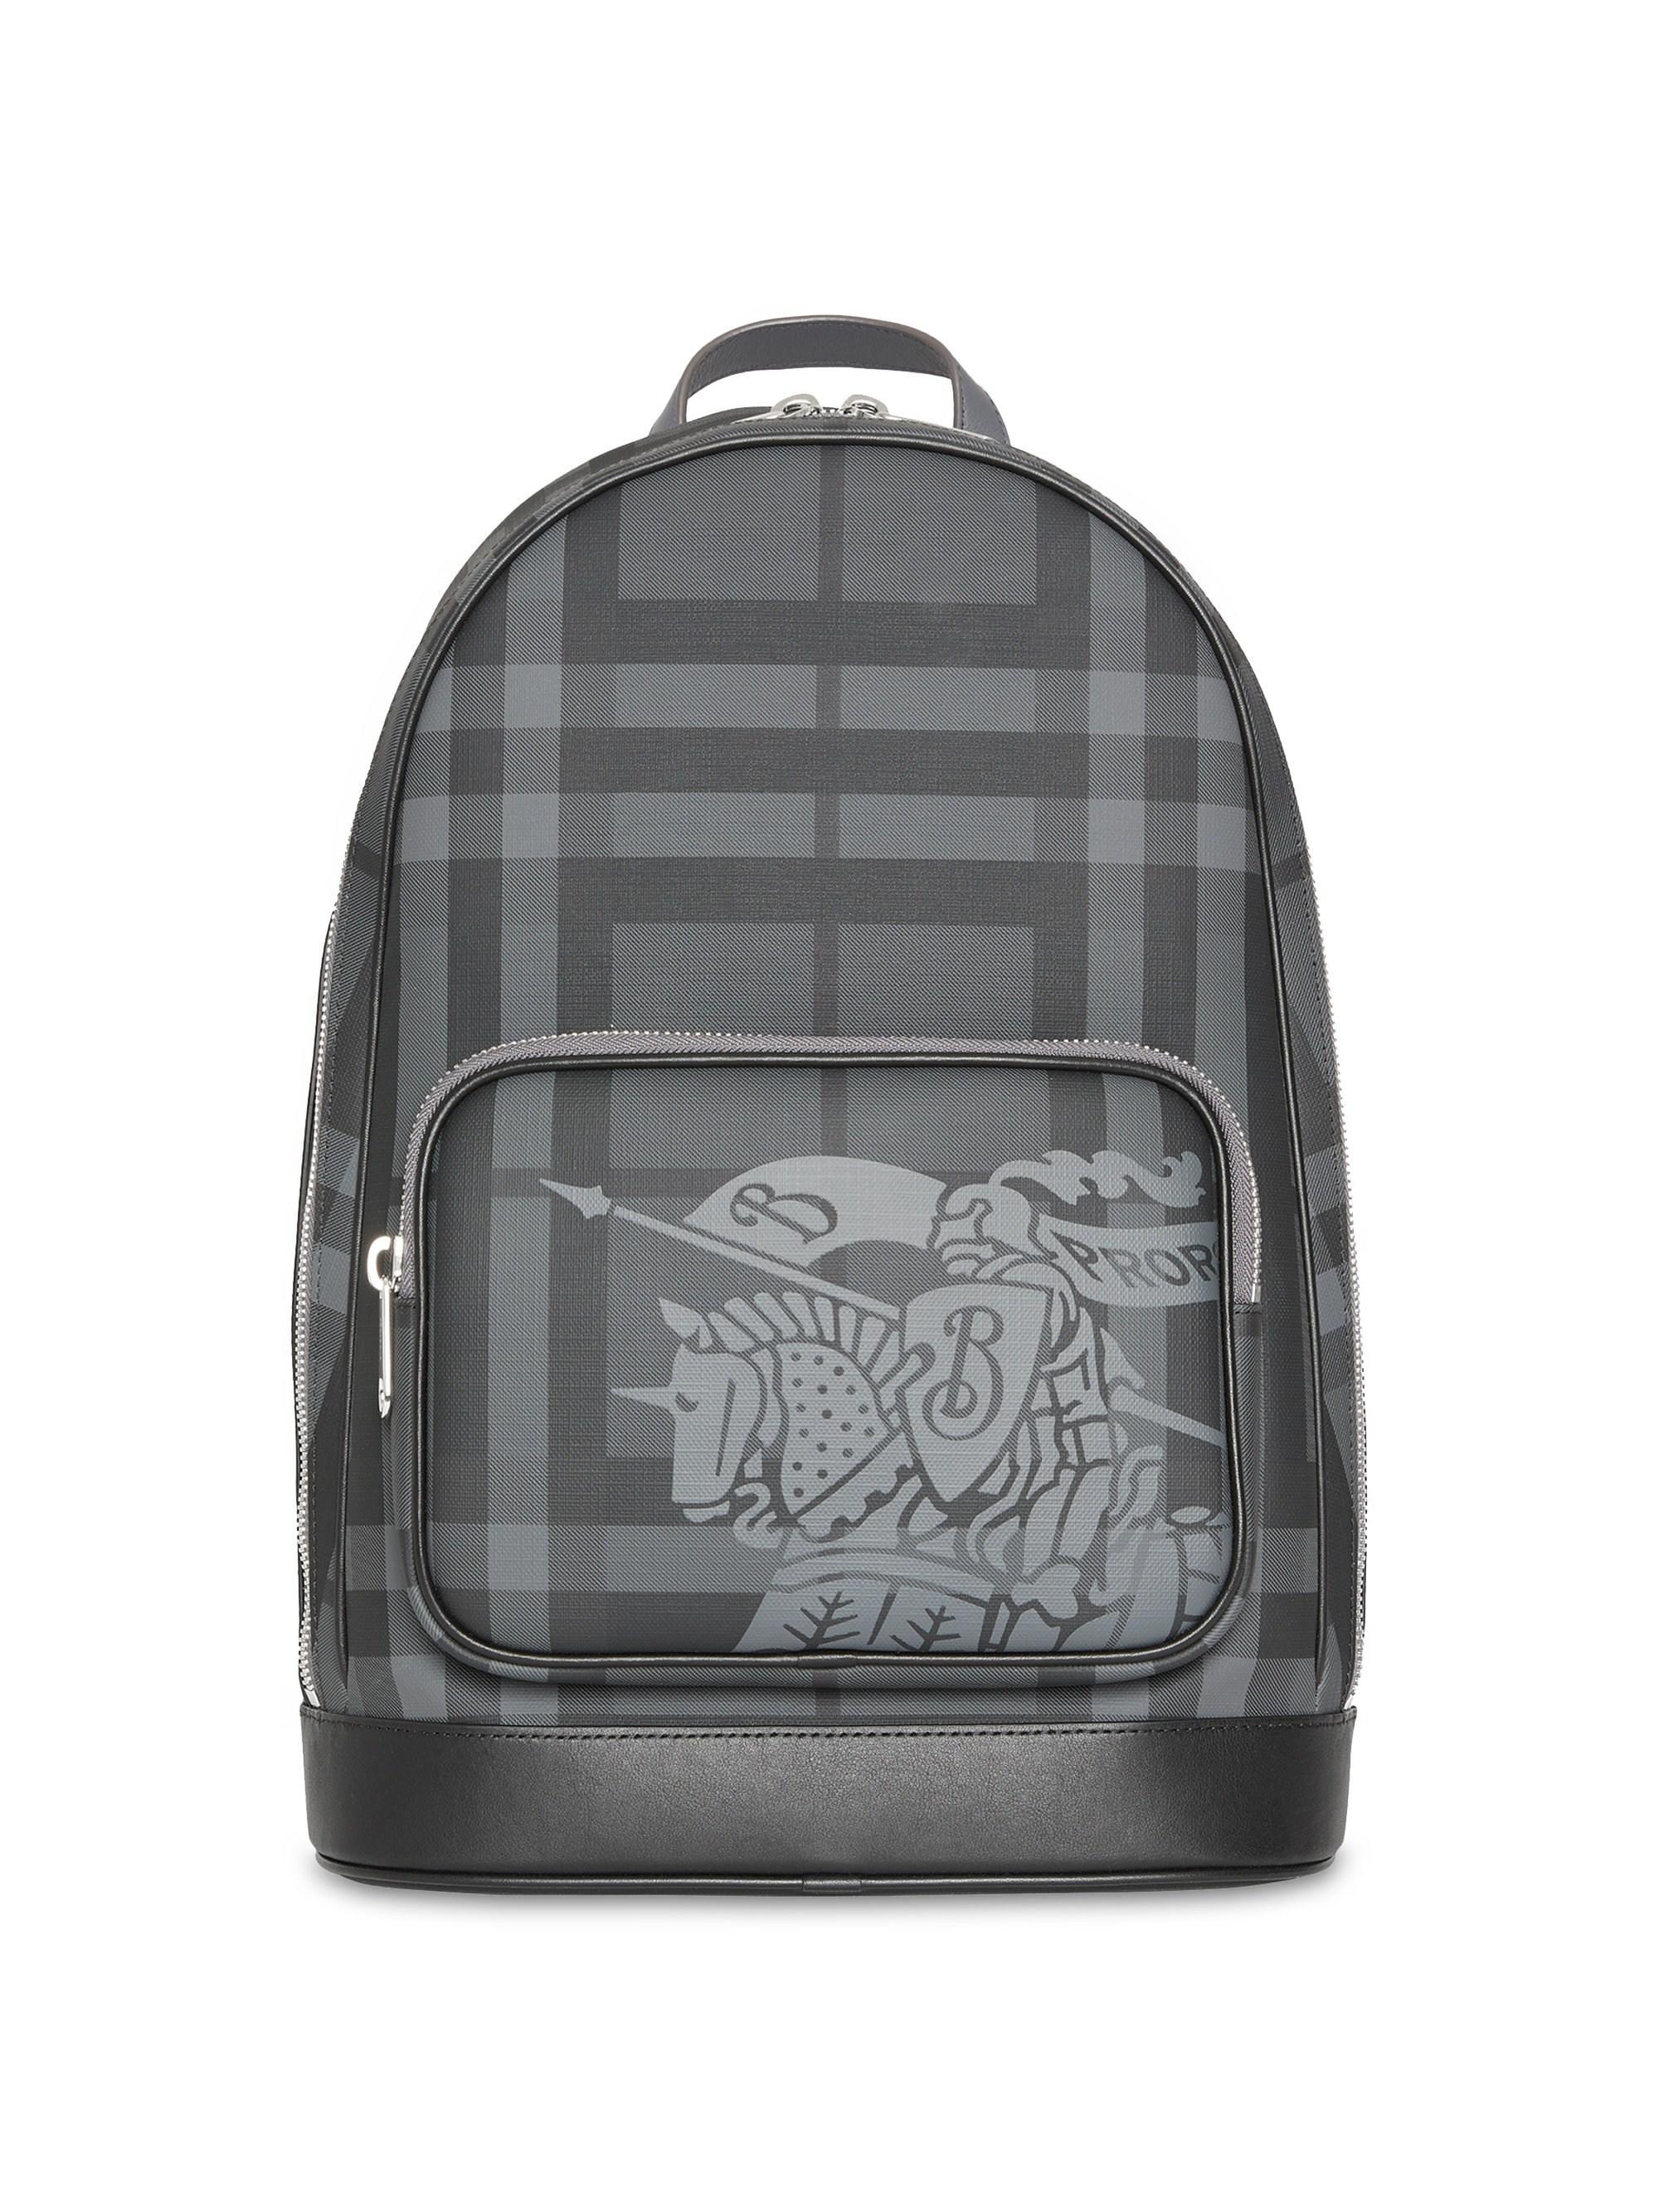 Burberry Ekd London Check And Leather Backpack in Charcoal/Black (Black)  for Men - Lyst